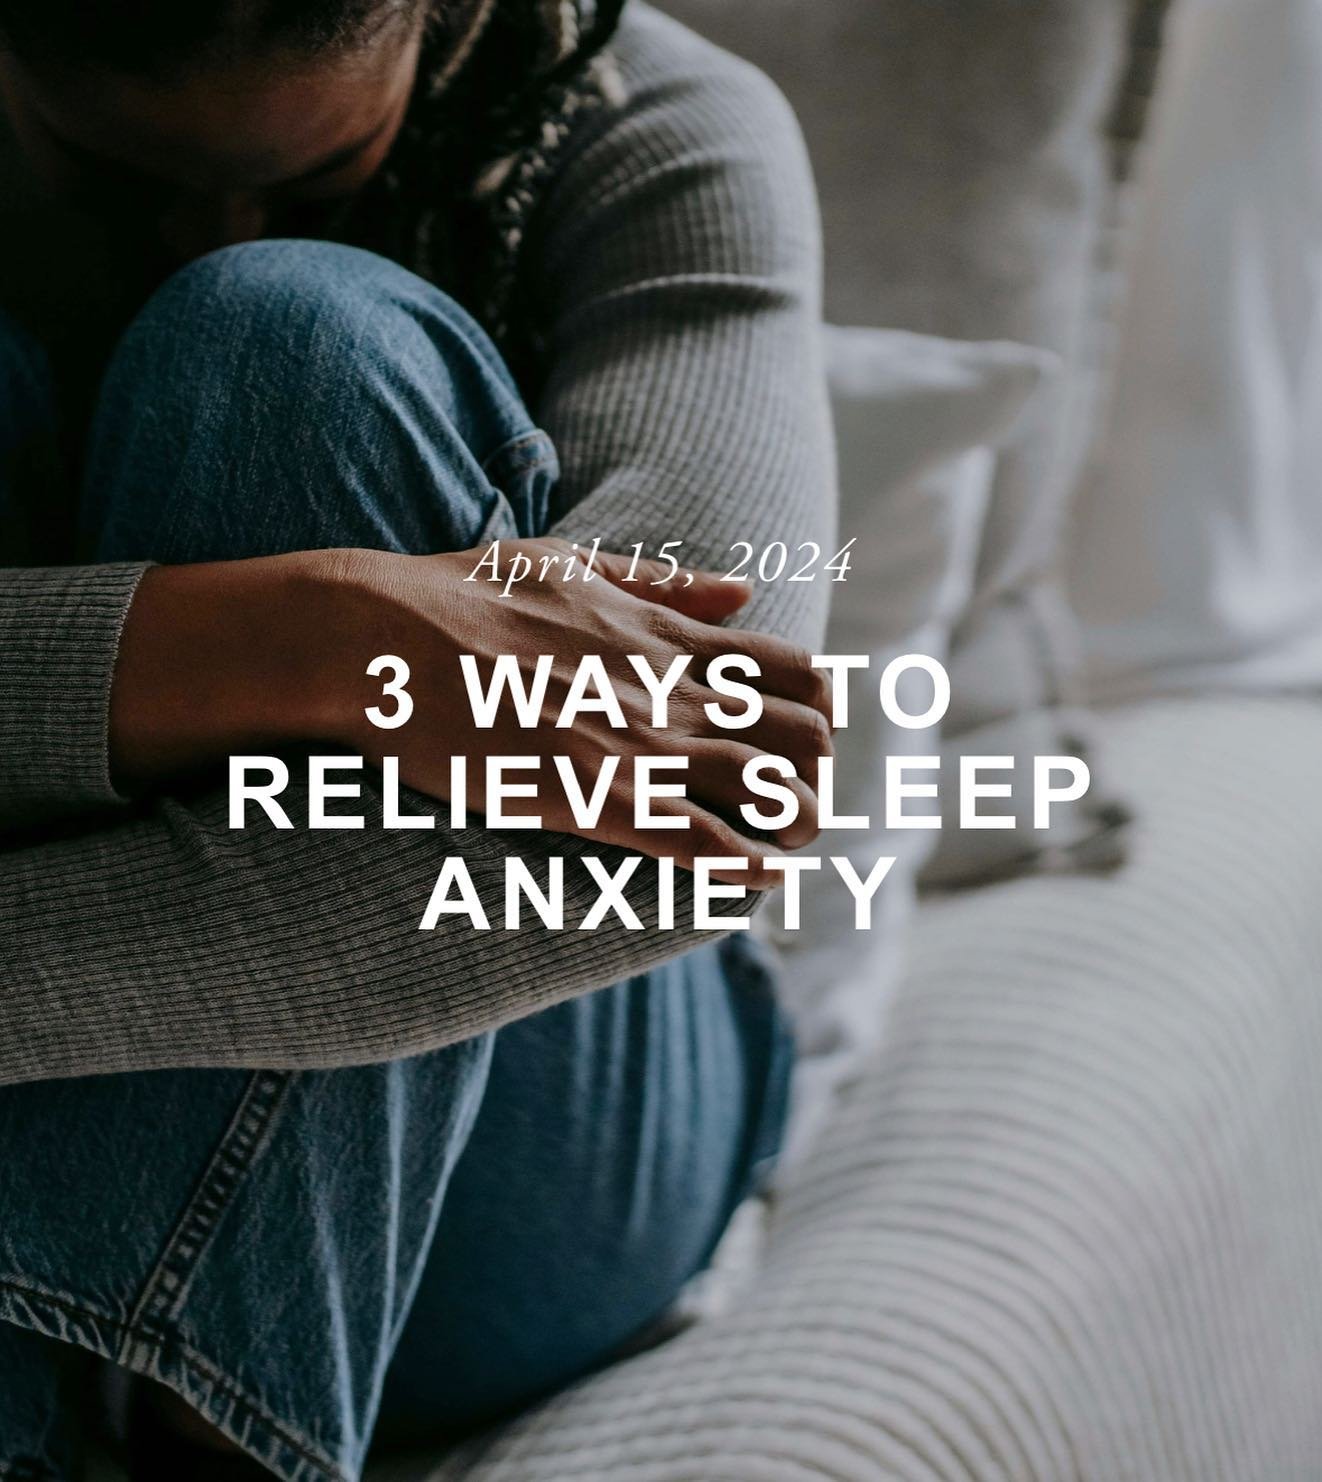 If you&rsquo;re looking for ways to relieve sleep anxiety, this blog is a must-read!

&ldquo;If you have sleep anxiety, you know how daunting bedtime can be. The constant tossing and turning. Feeling like you have a million things on your mind. Remem